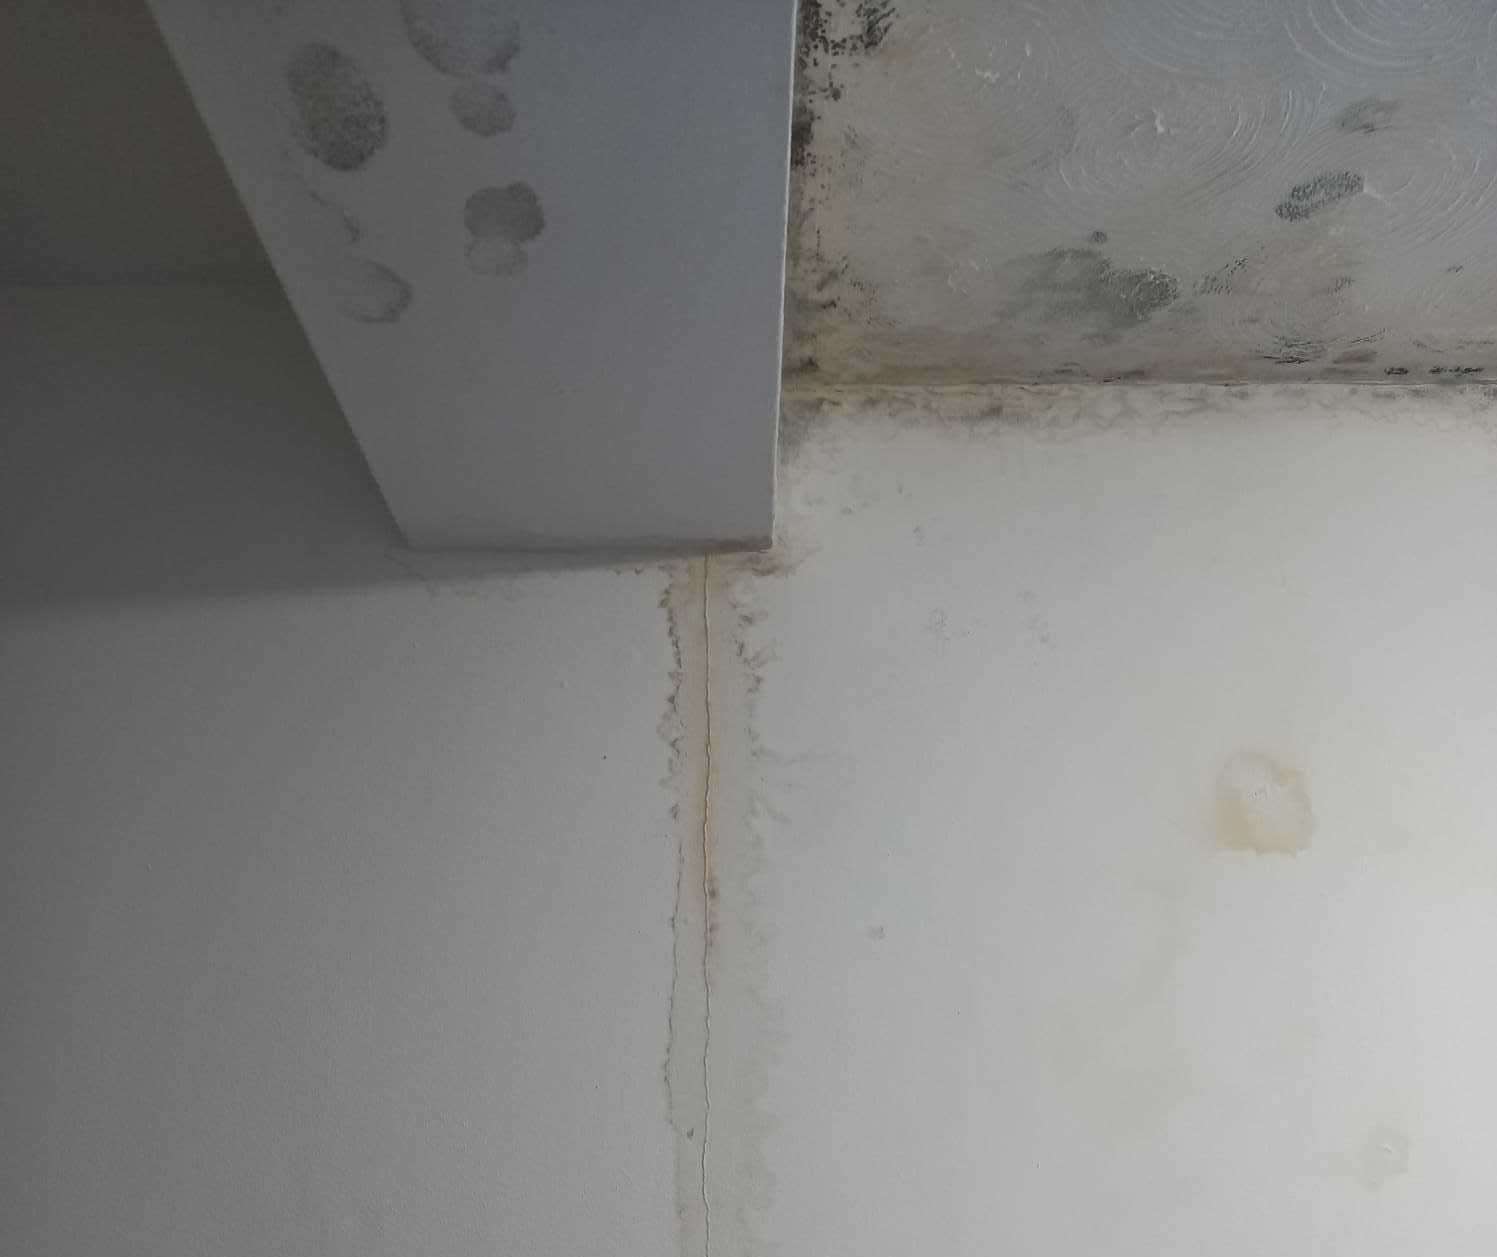 Mould and damp on the walls and ceiling in Gemma Cushing’s emergency accommodation in Dover